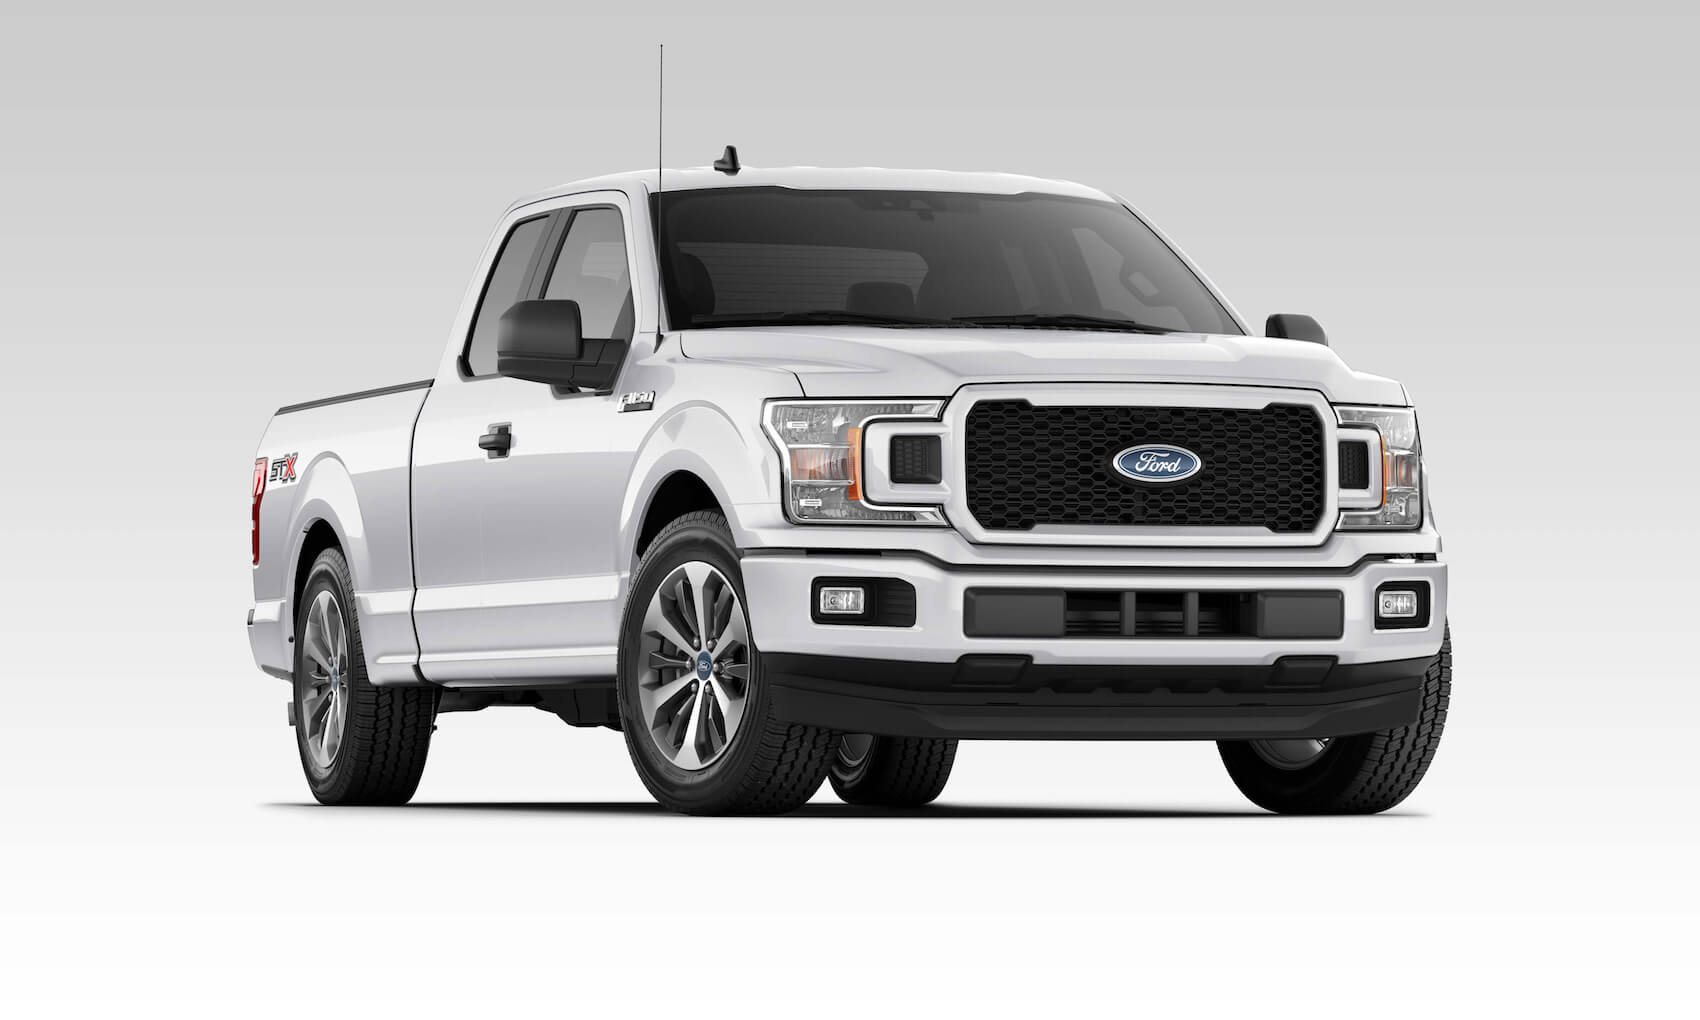 2020 Ford F-150 for sale near Portsmouth, VA